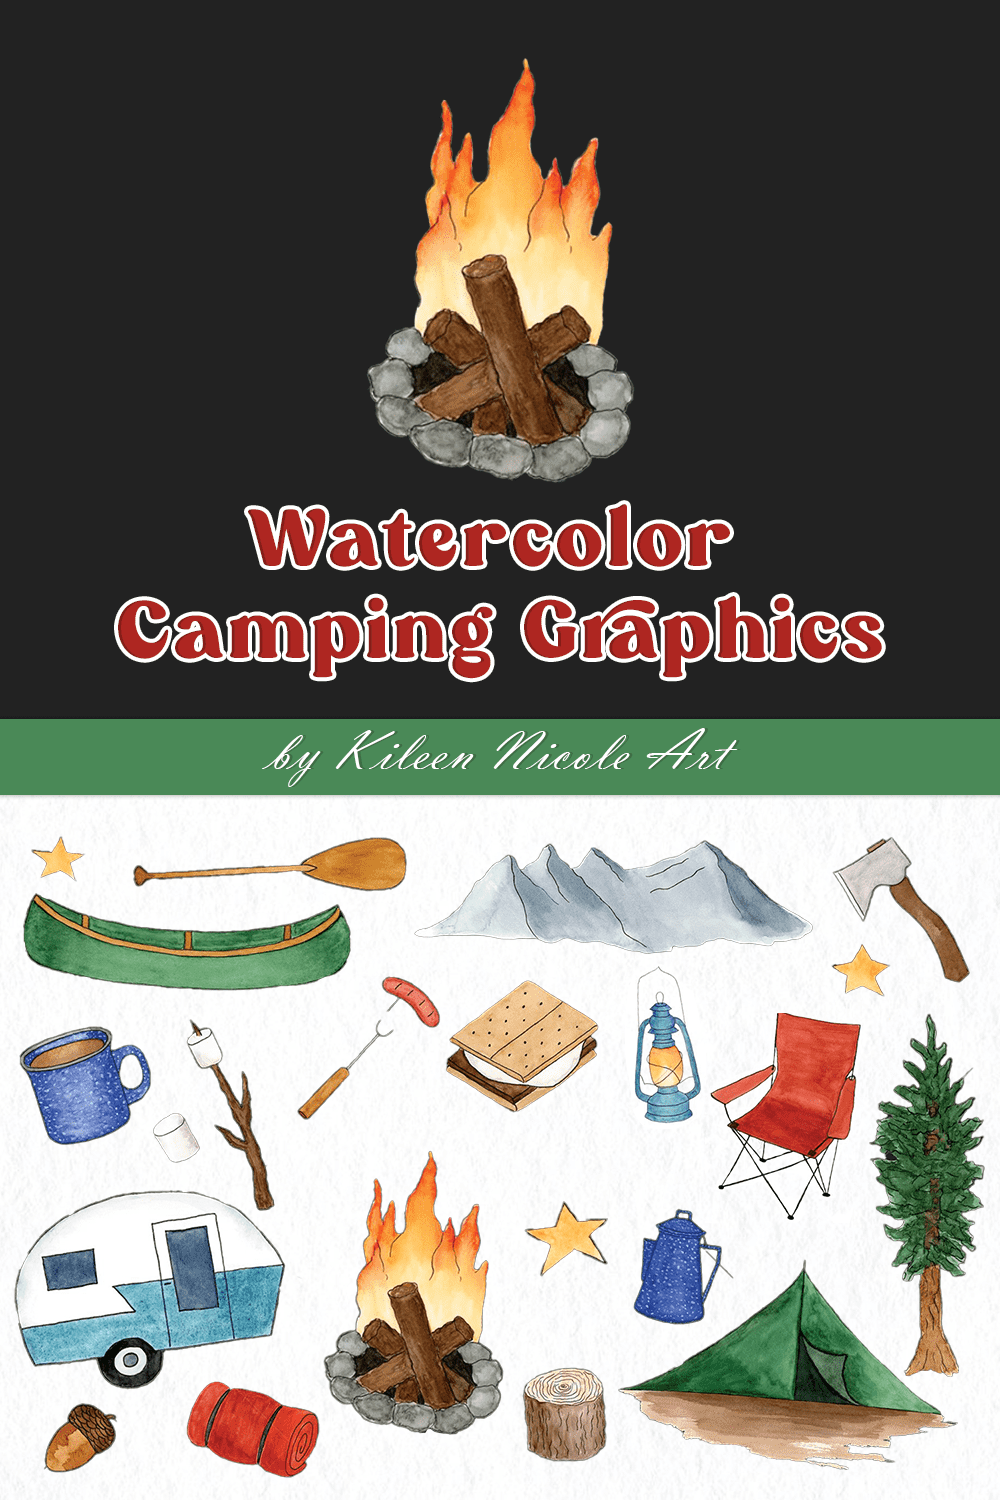 Watercolor camping graphics - pinterest image preview.